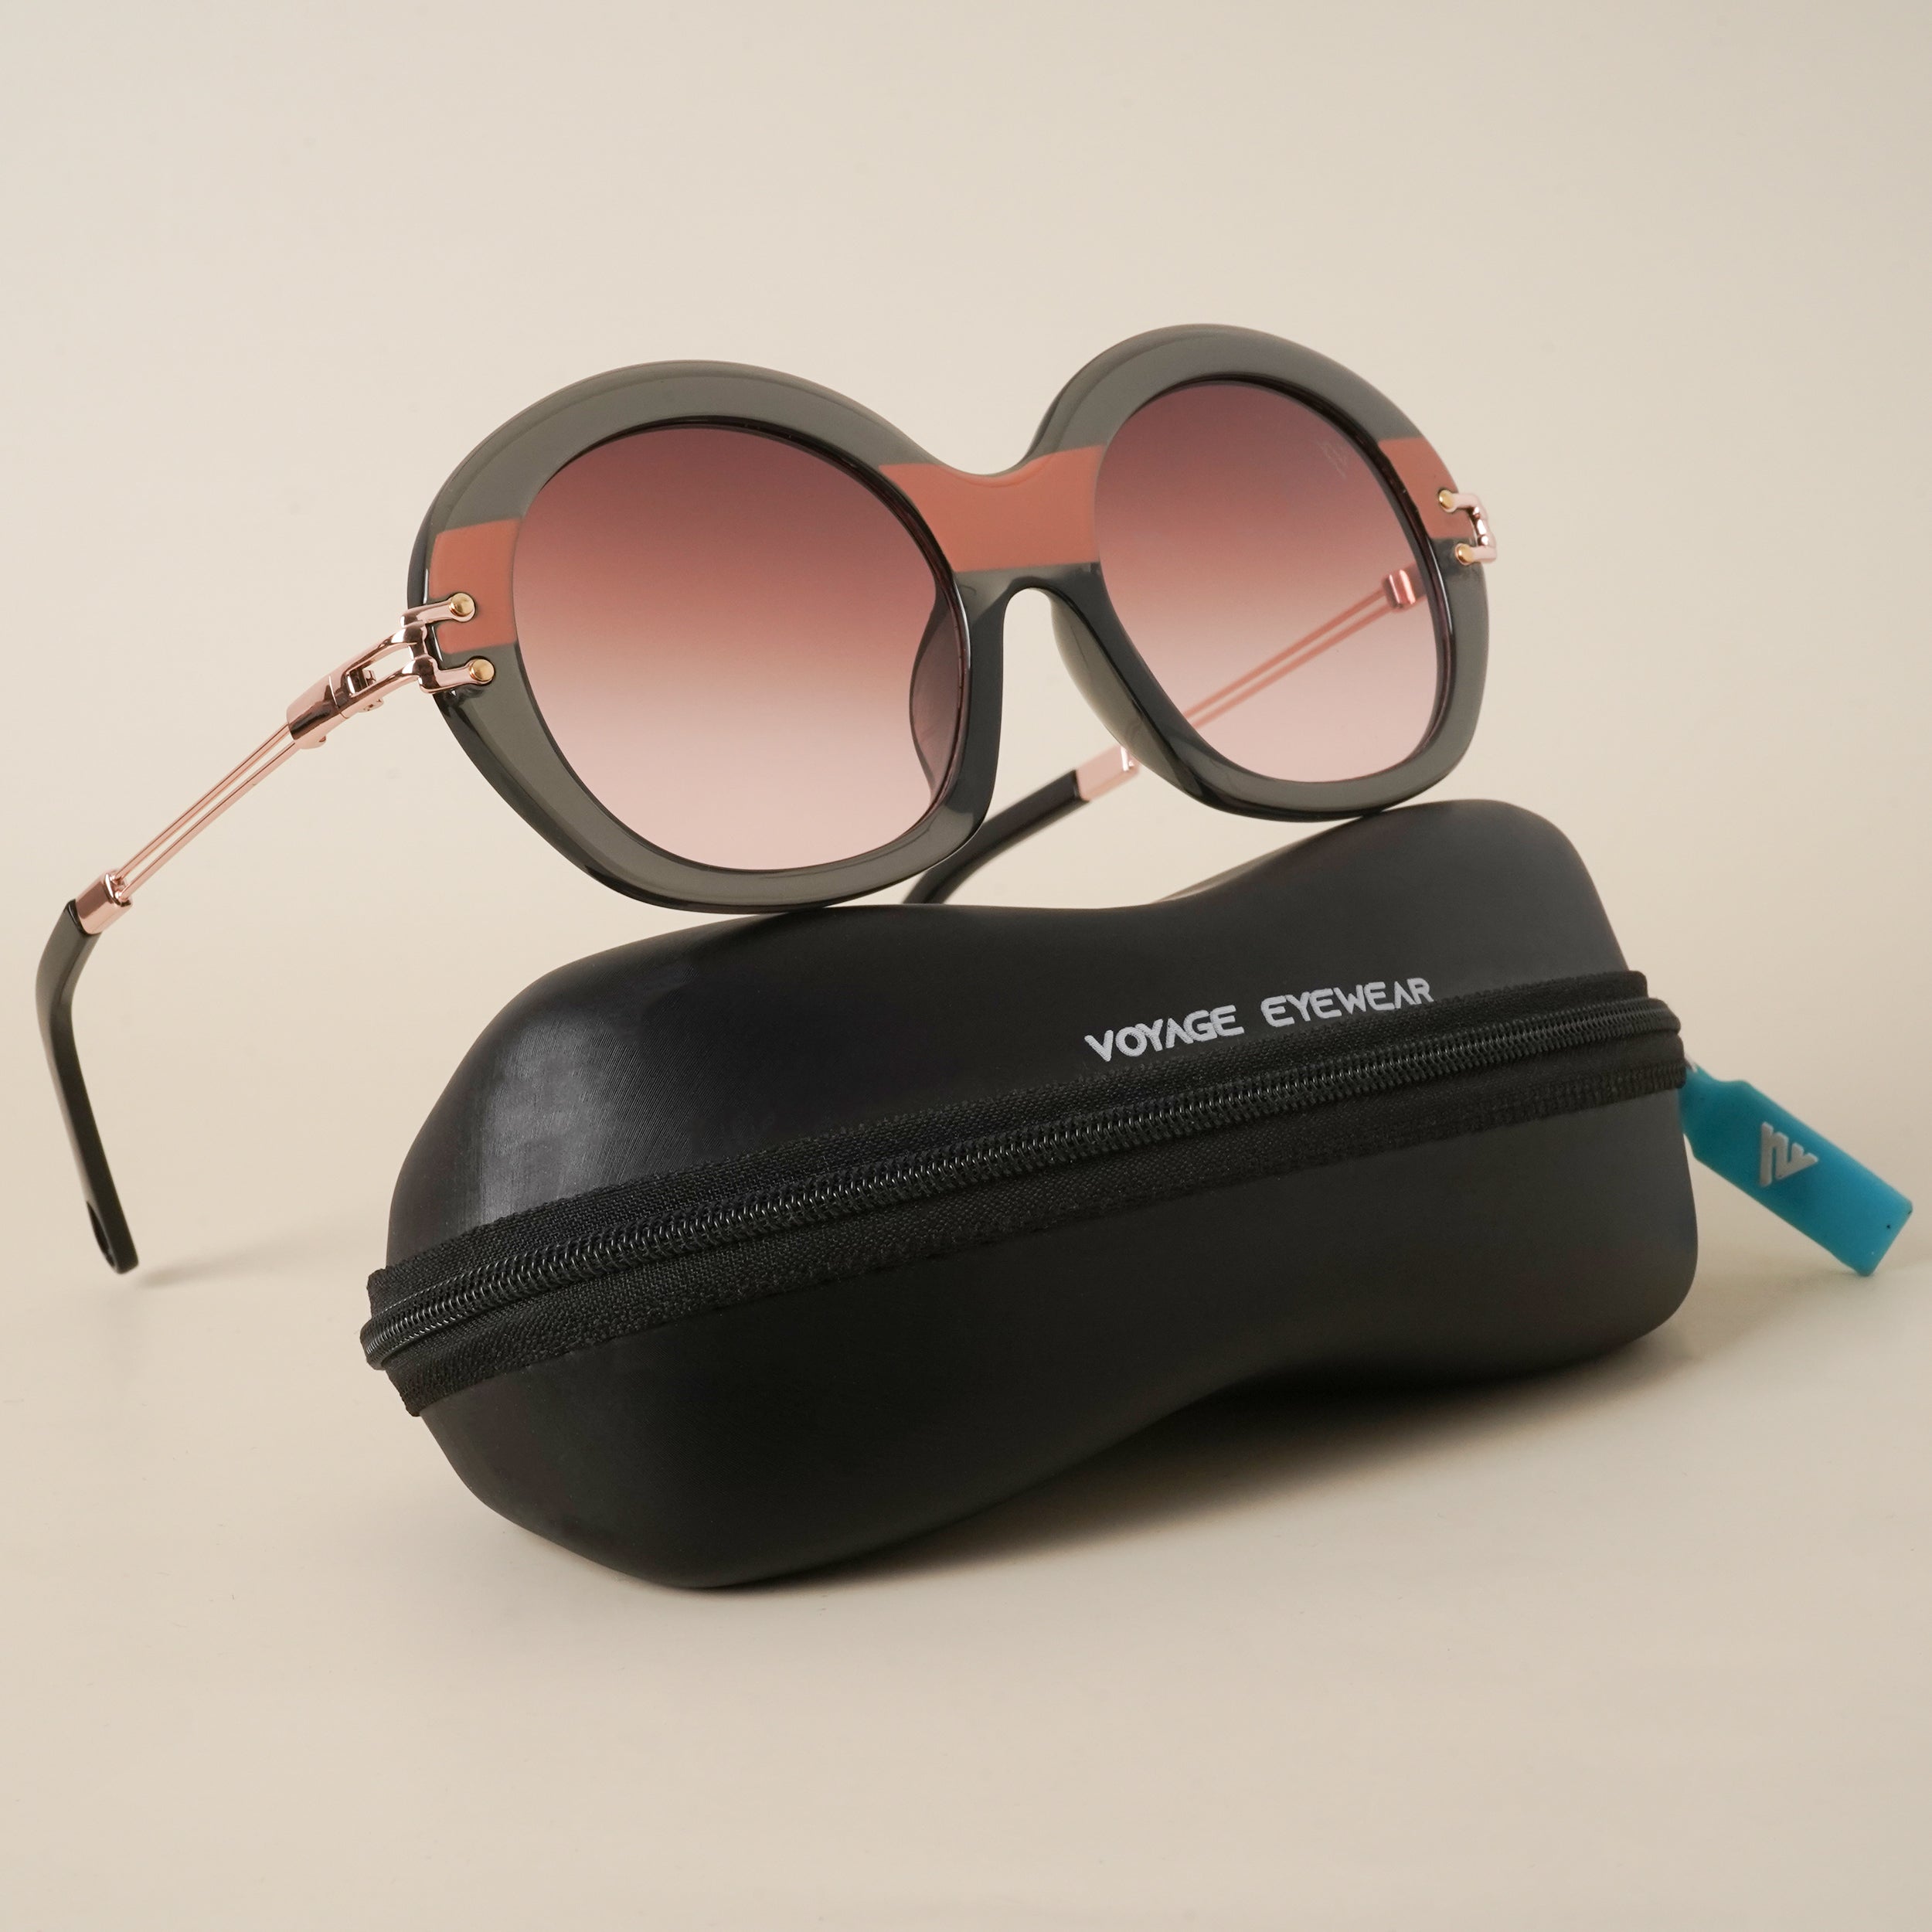 Voyage Light Brown & Pink Over Size Sunglasses (86585MG3912)